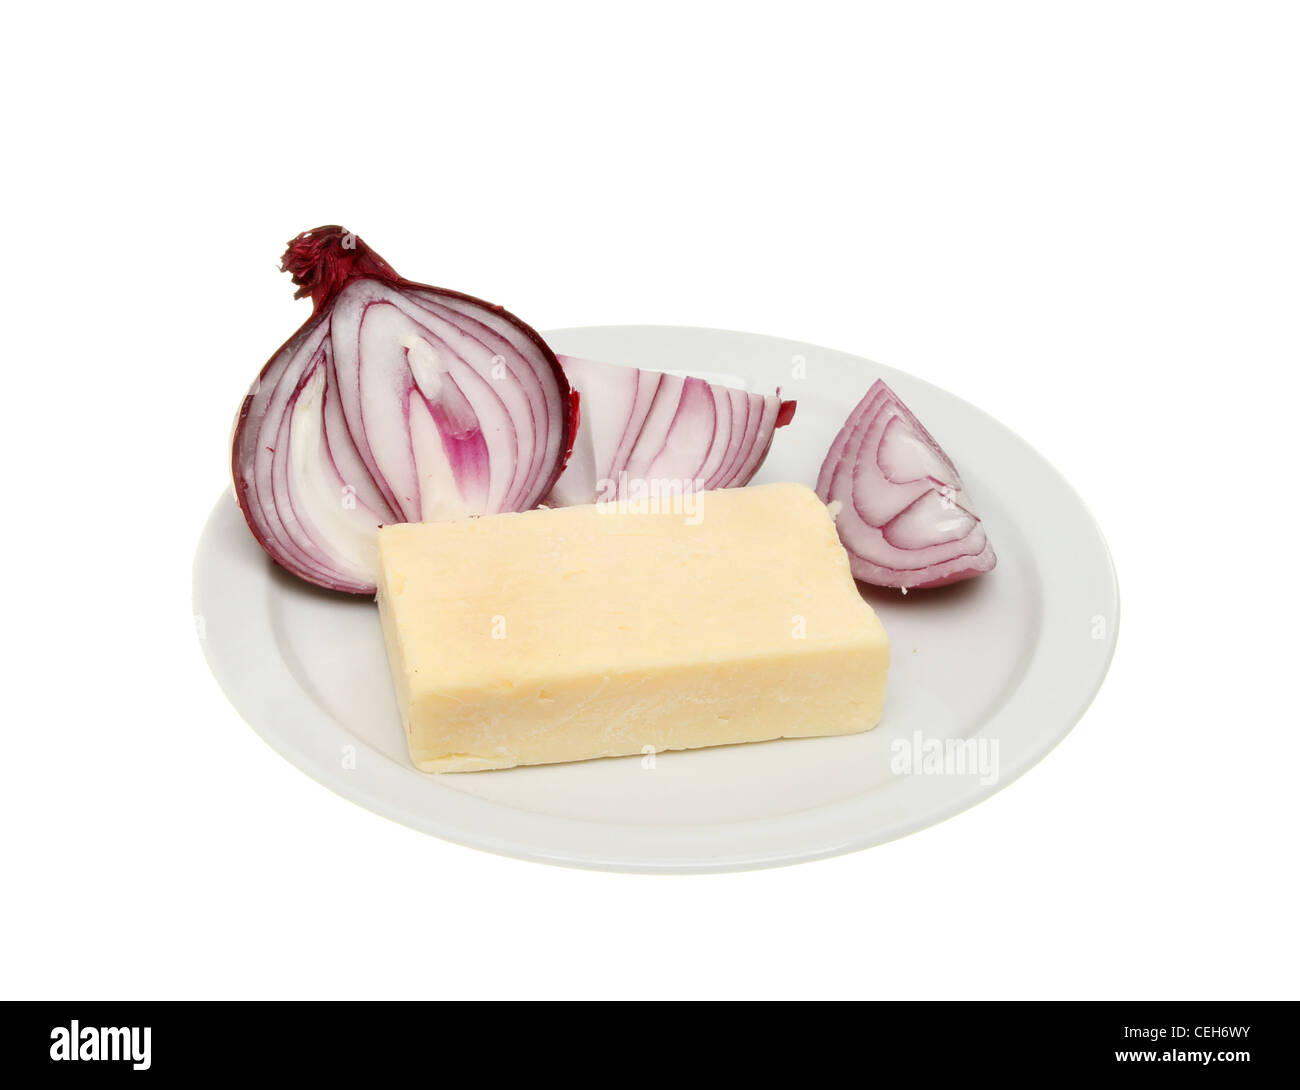 Cheddar cheese and red onion on a plate isolated against white Stock Photo